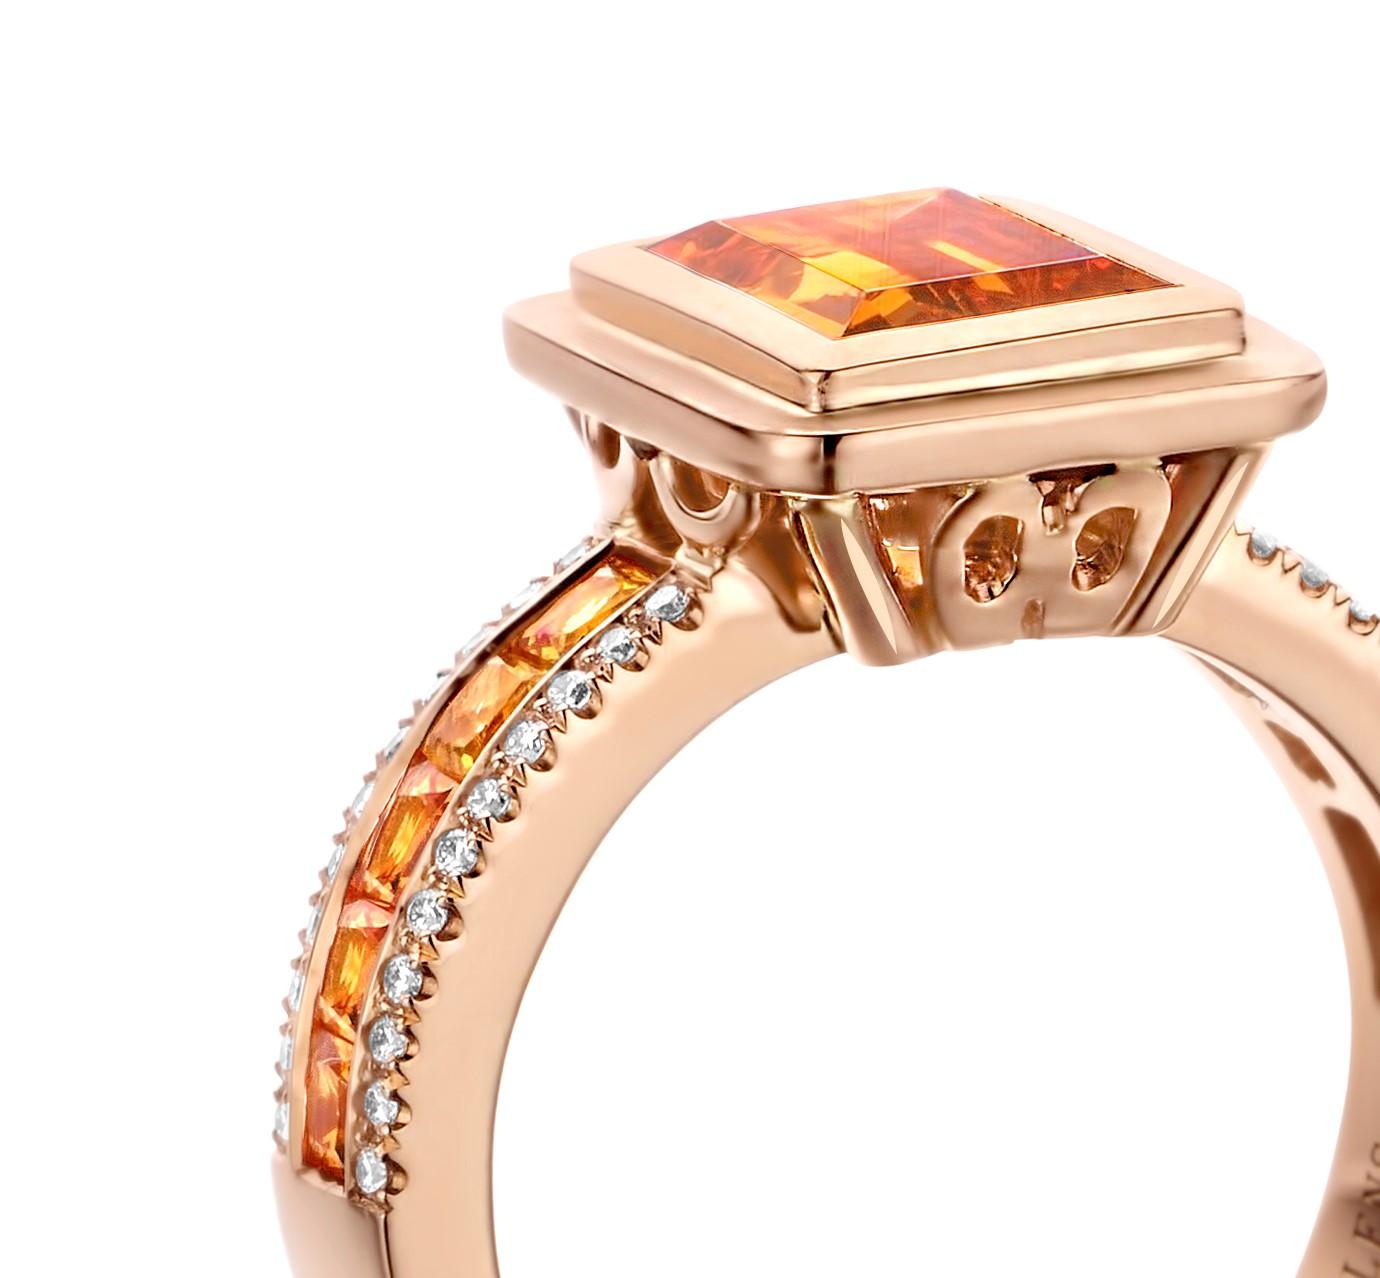 One of a kind “Grace” ring in 18 Karat rose gold 8,2g set with 1 natural, eye clean, mandarin garnet in baguette cut 2,64-Carat diamonds in brilliant cut 0,13 Carat (VS-F quality) and yellow and orange sapphires in princess cut 0,80 Carat.

Because